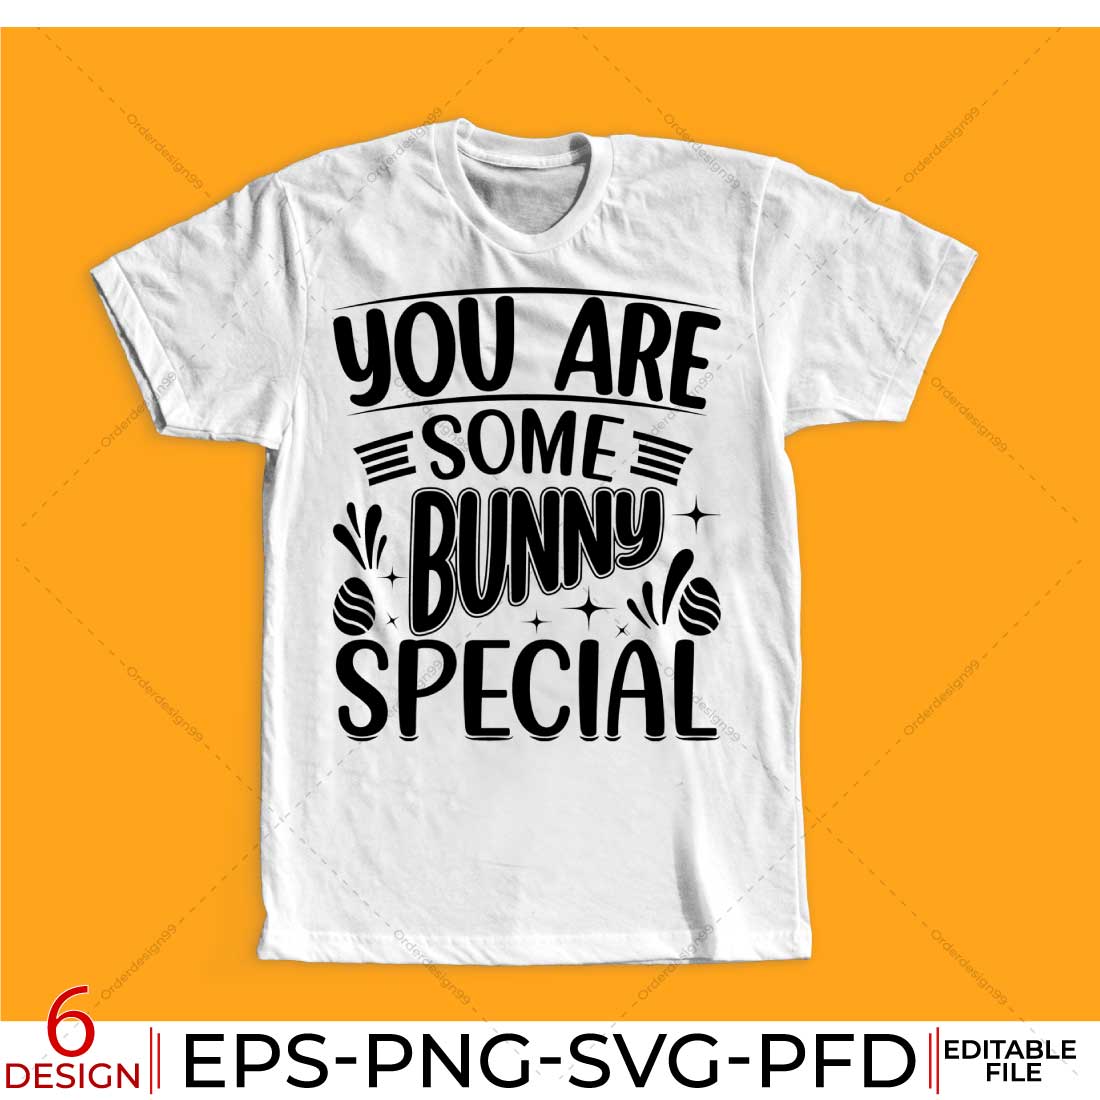 T - shirt that says you are some bunny special.